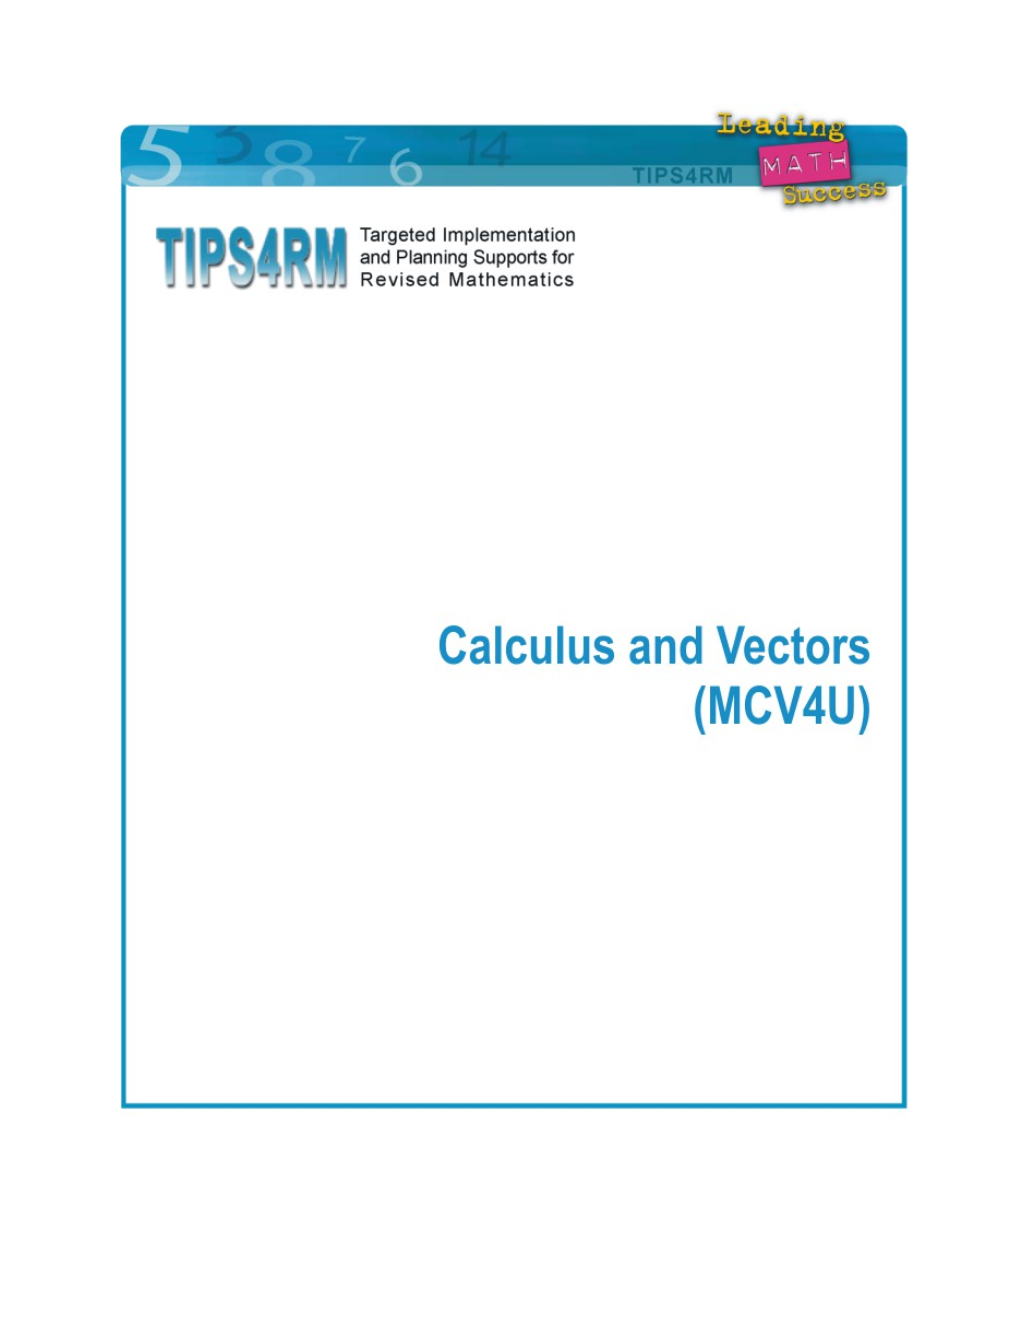 Calculus and Vectors: Content and Reporting Targets